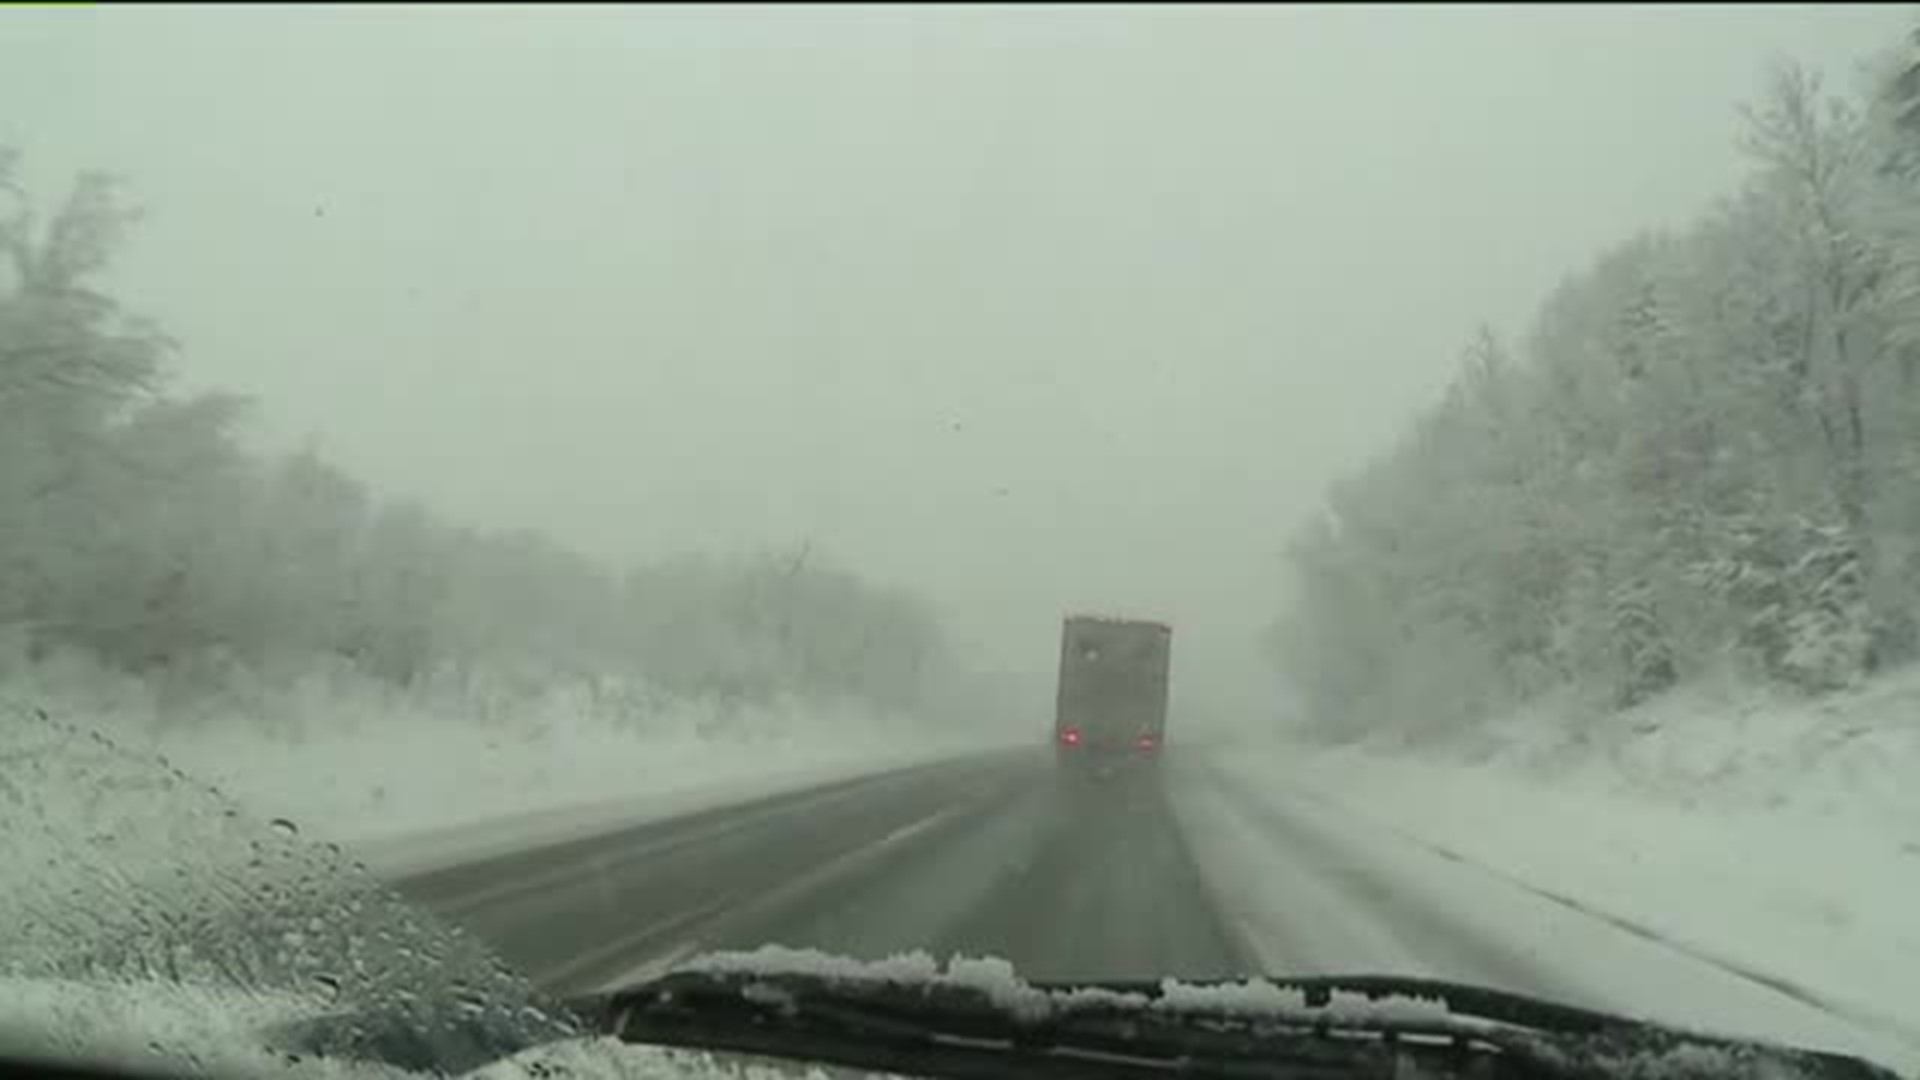 PennDOT Offers Tips for Driving in the Snow